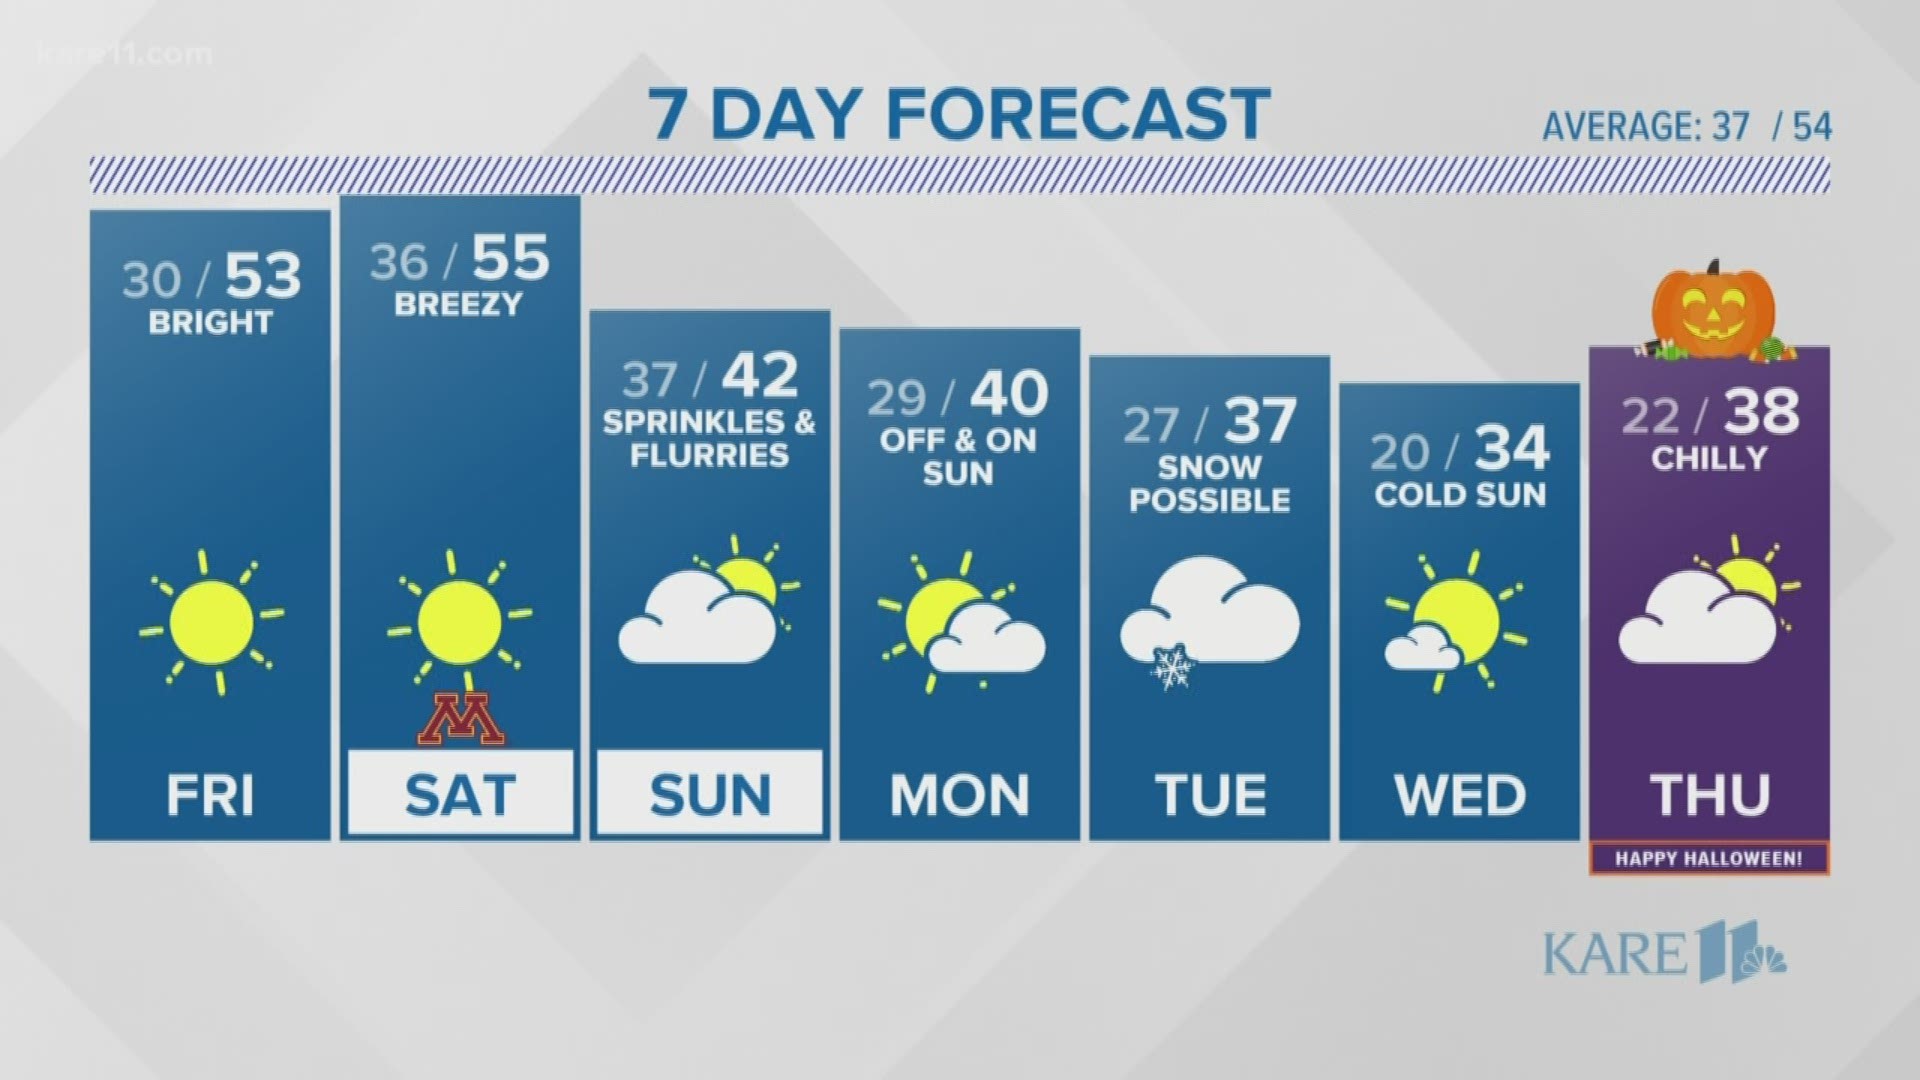 Not quite as warm as last weekend but it's still pretty nice coming up before a blast of cold next week.